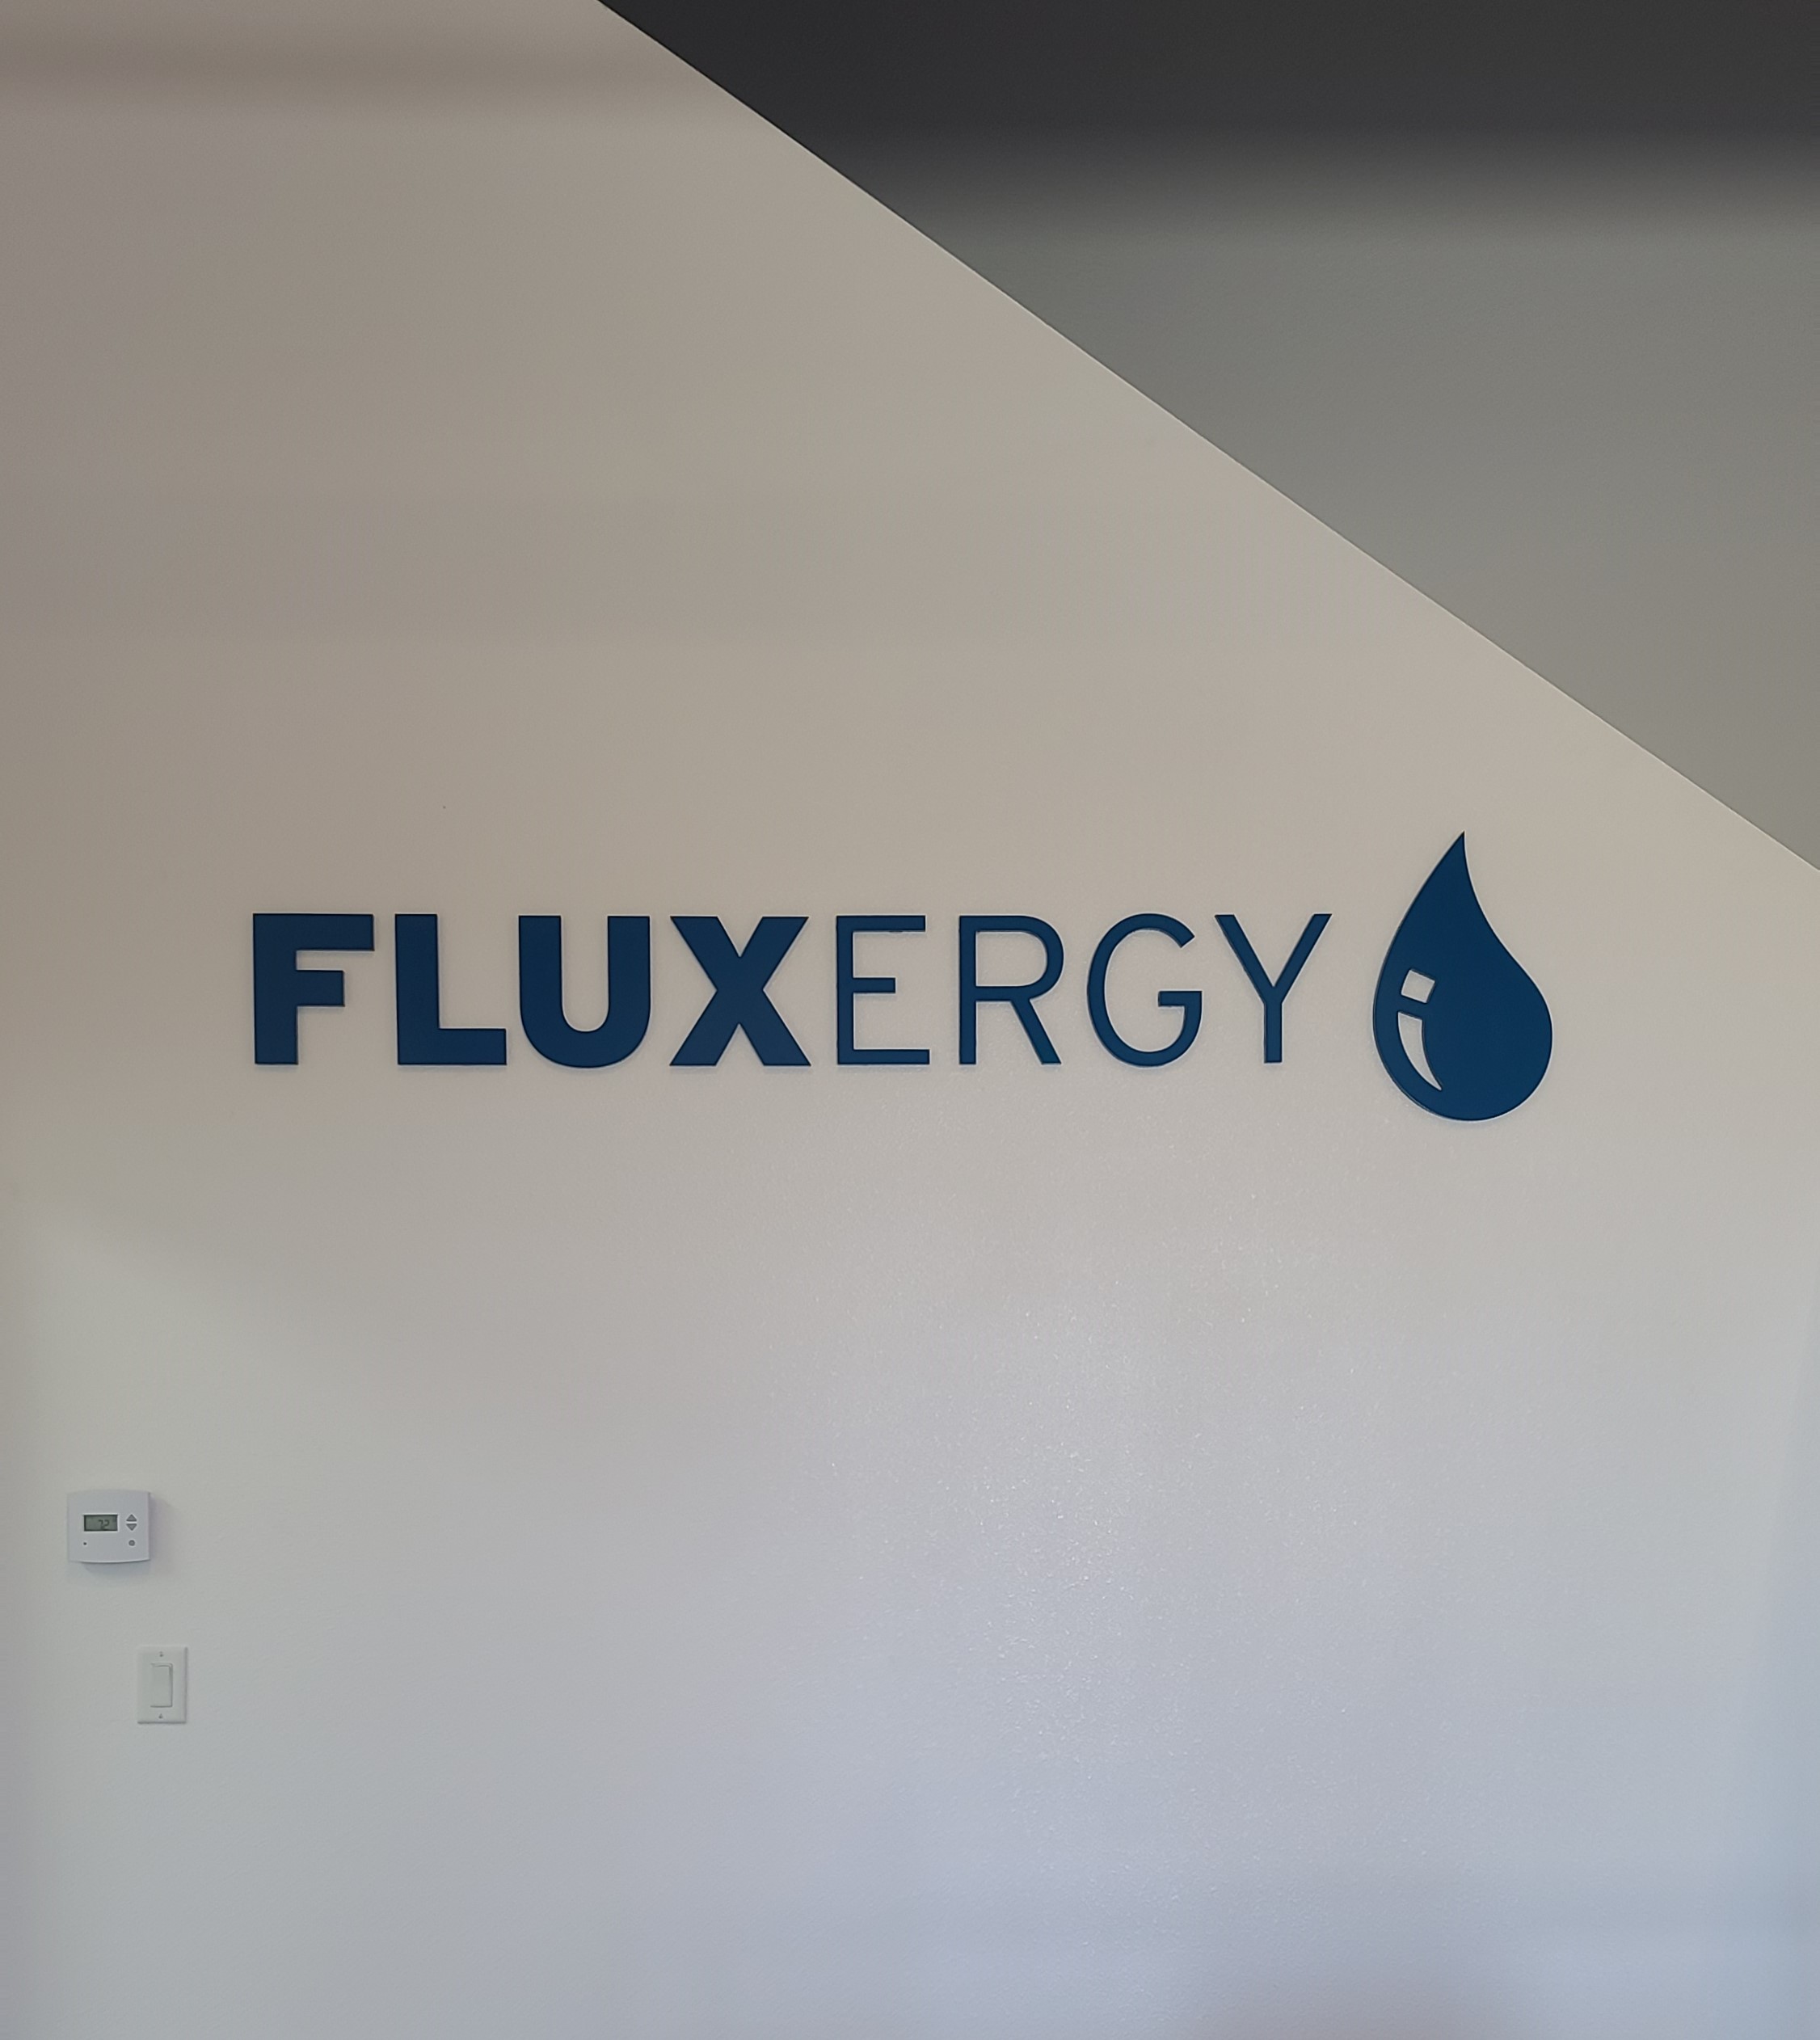 You are currently viewing Indoor Dimensional Letter Office Sign for Fluxergy in Irvine